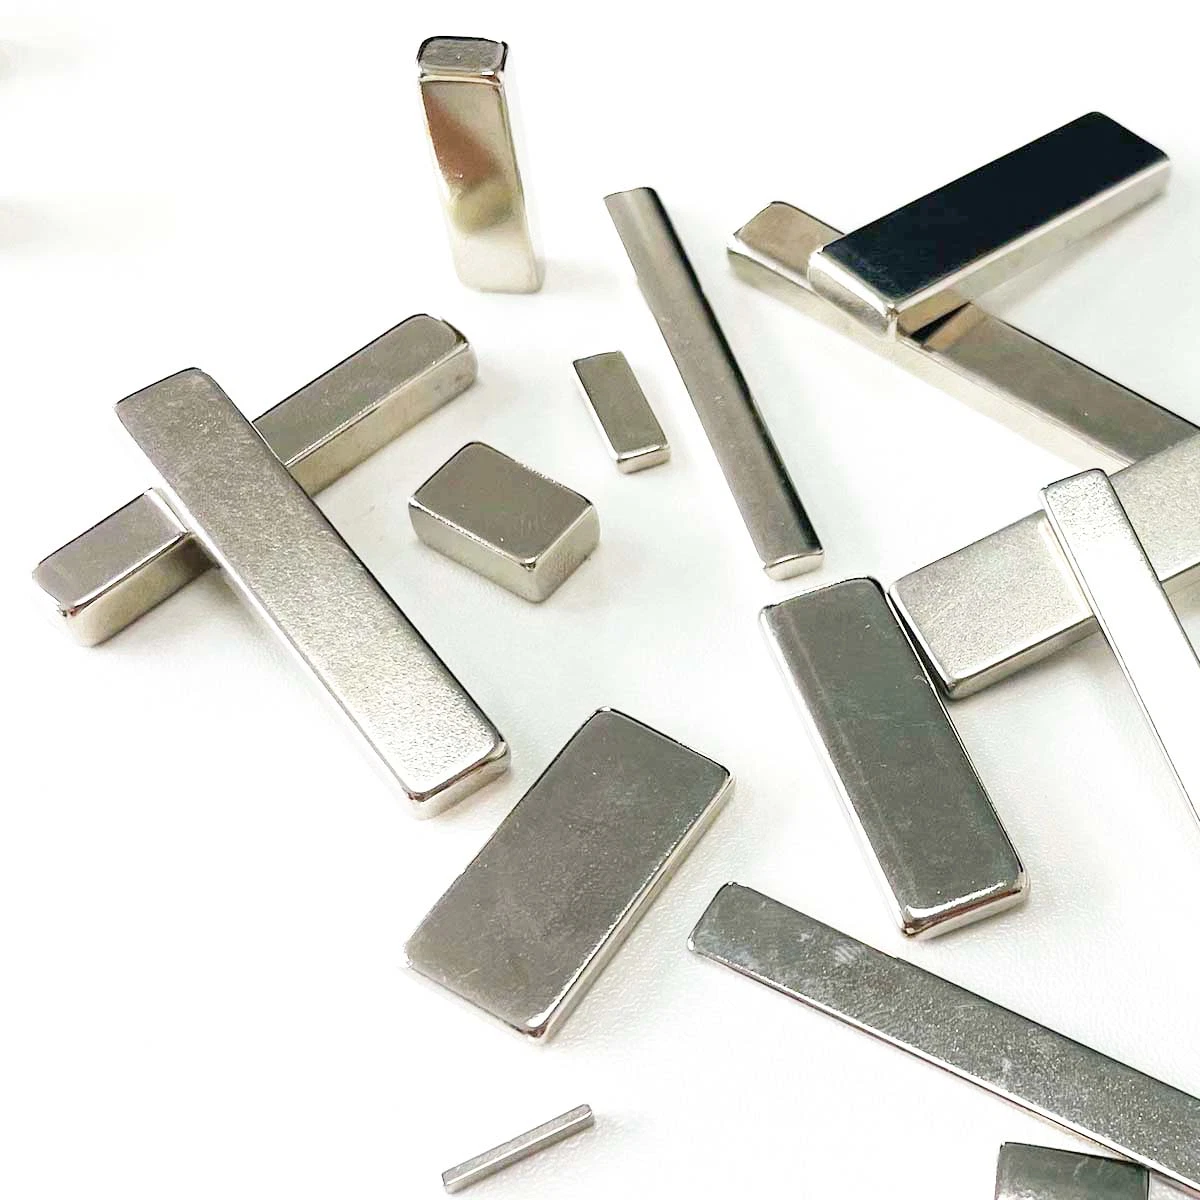 I Shape Small Flat Neodymium Block Strong Magnetic Strips Magnet